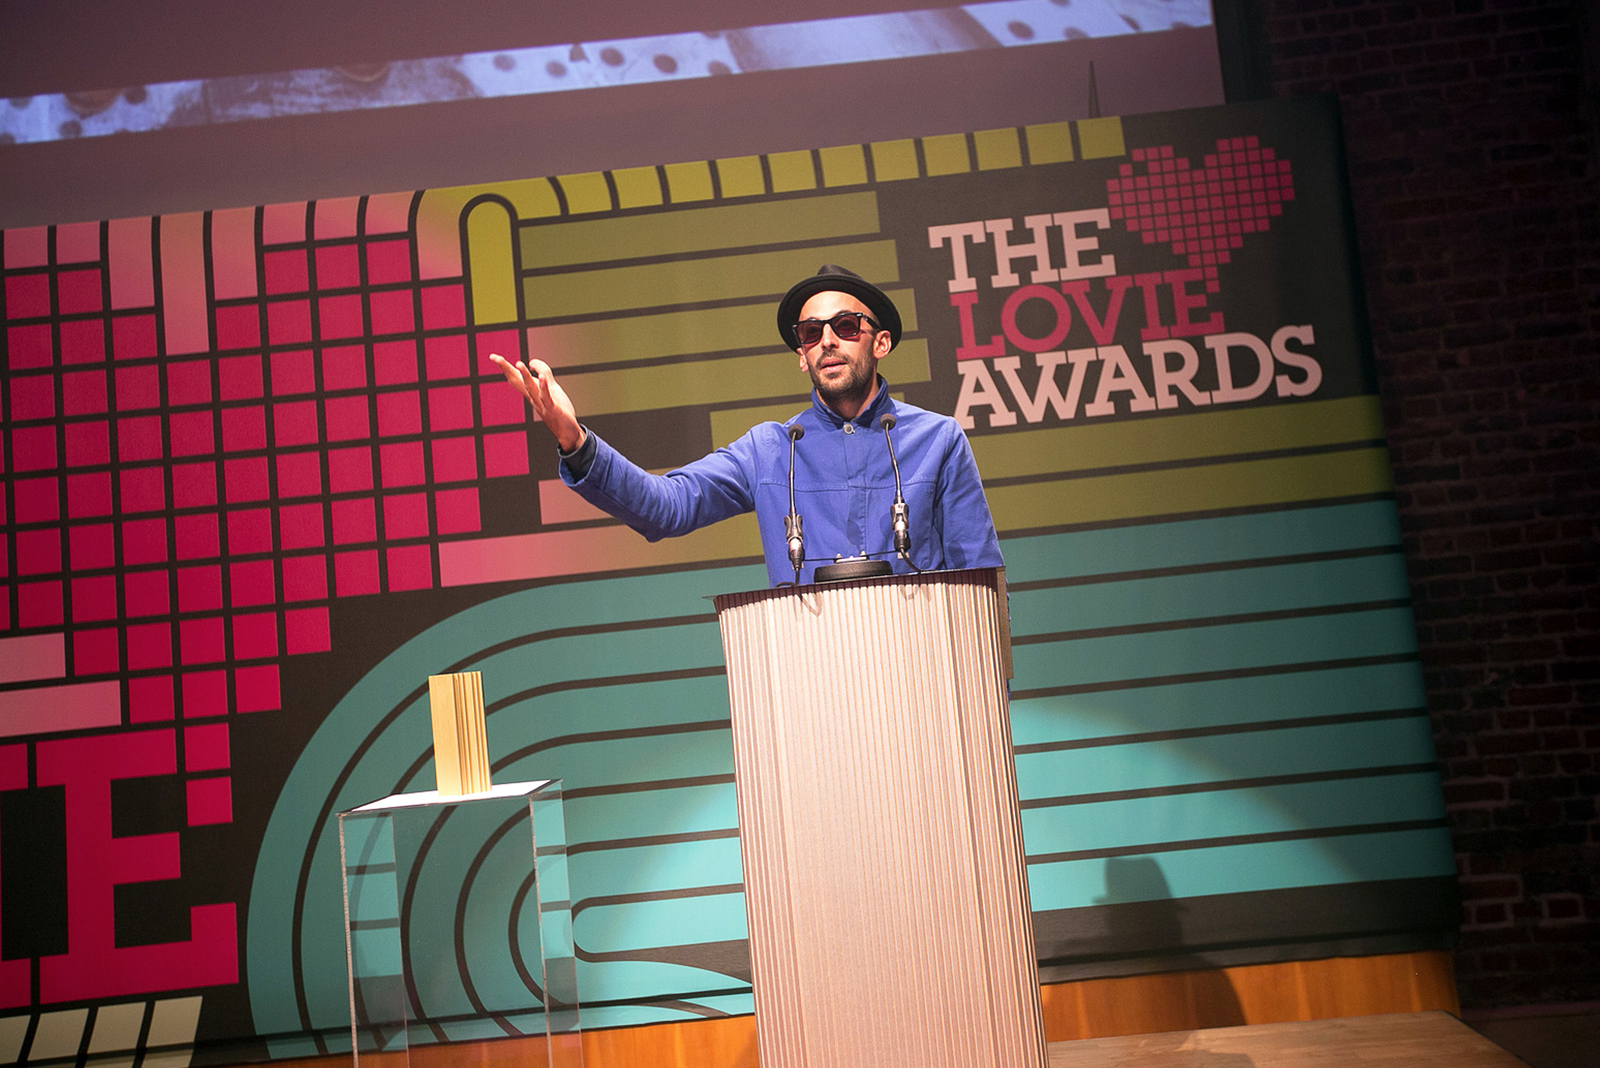 Entries to the 13th Annual Lovie Awards are now closed.